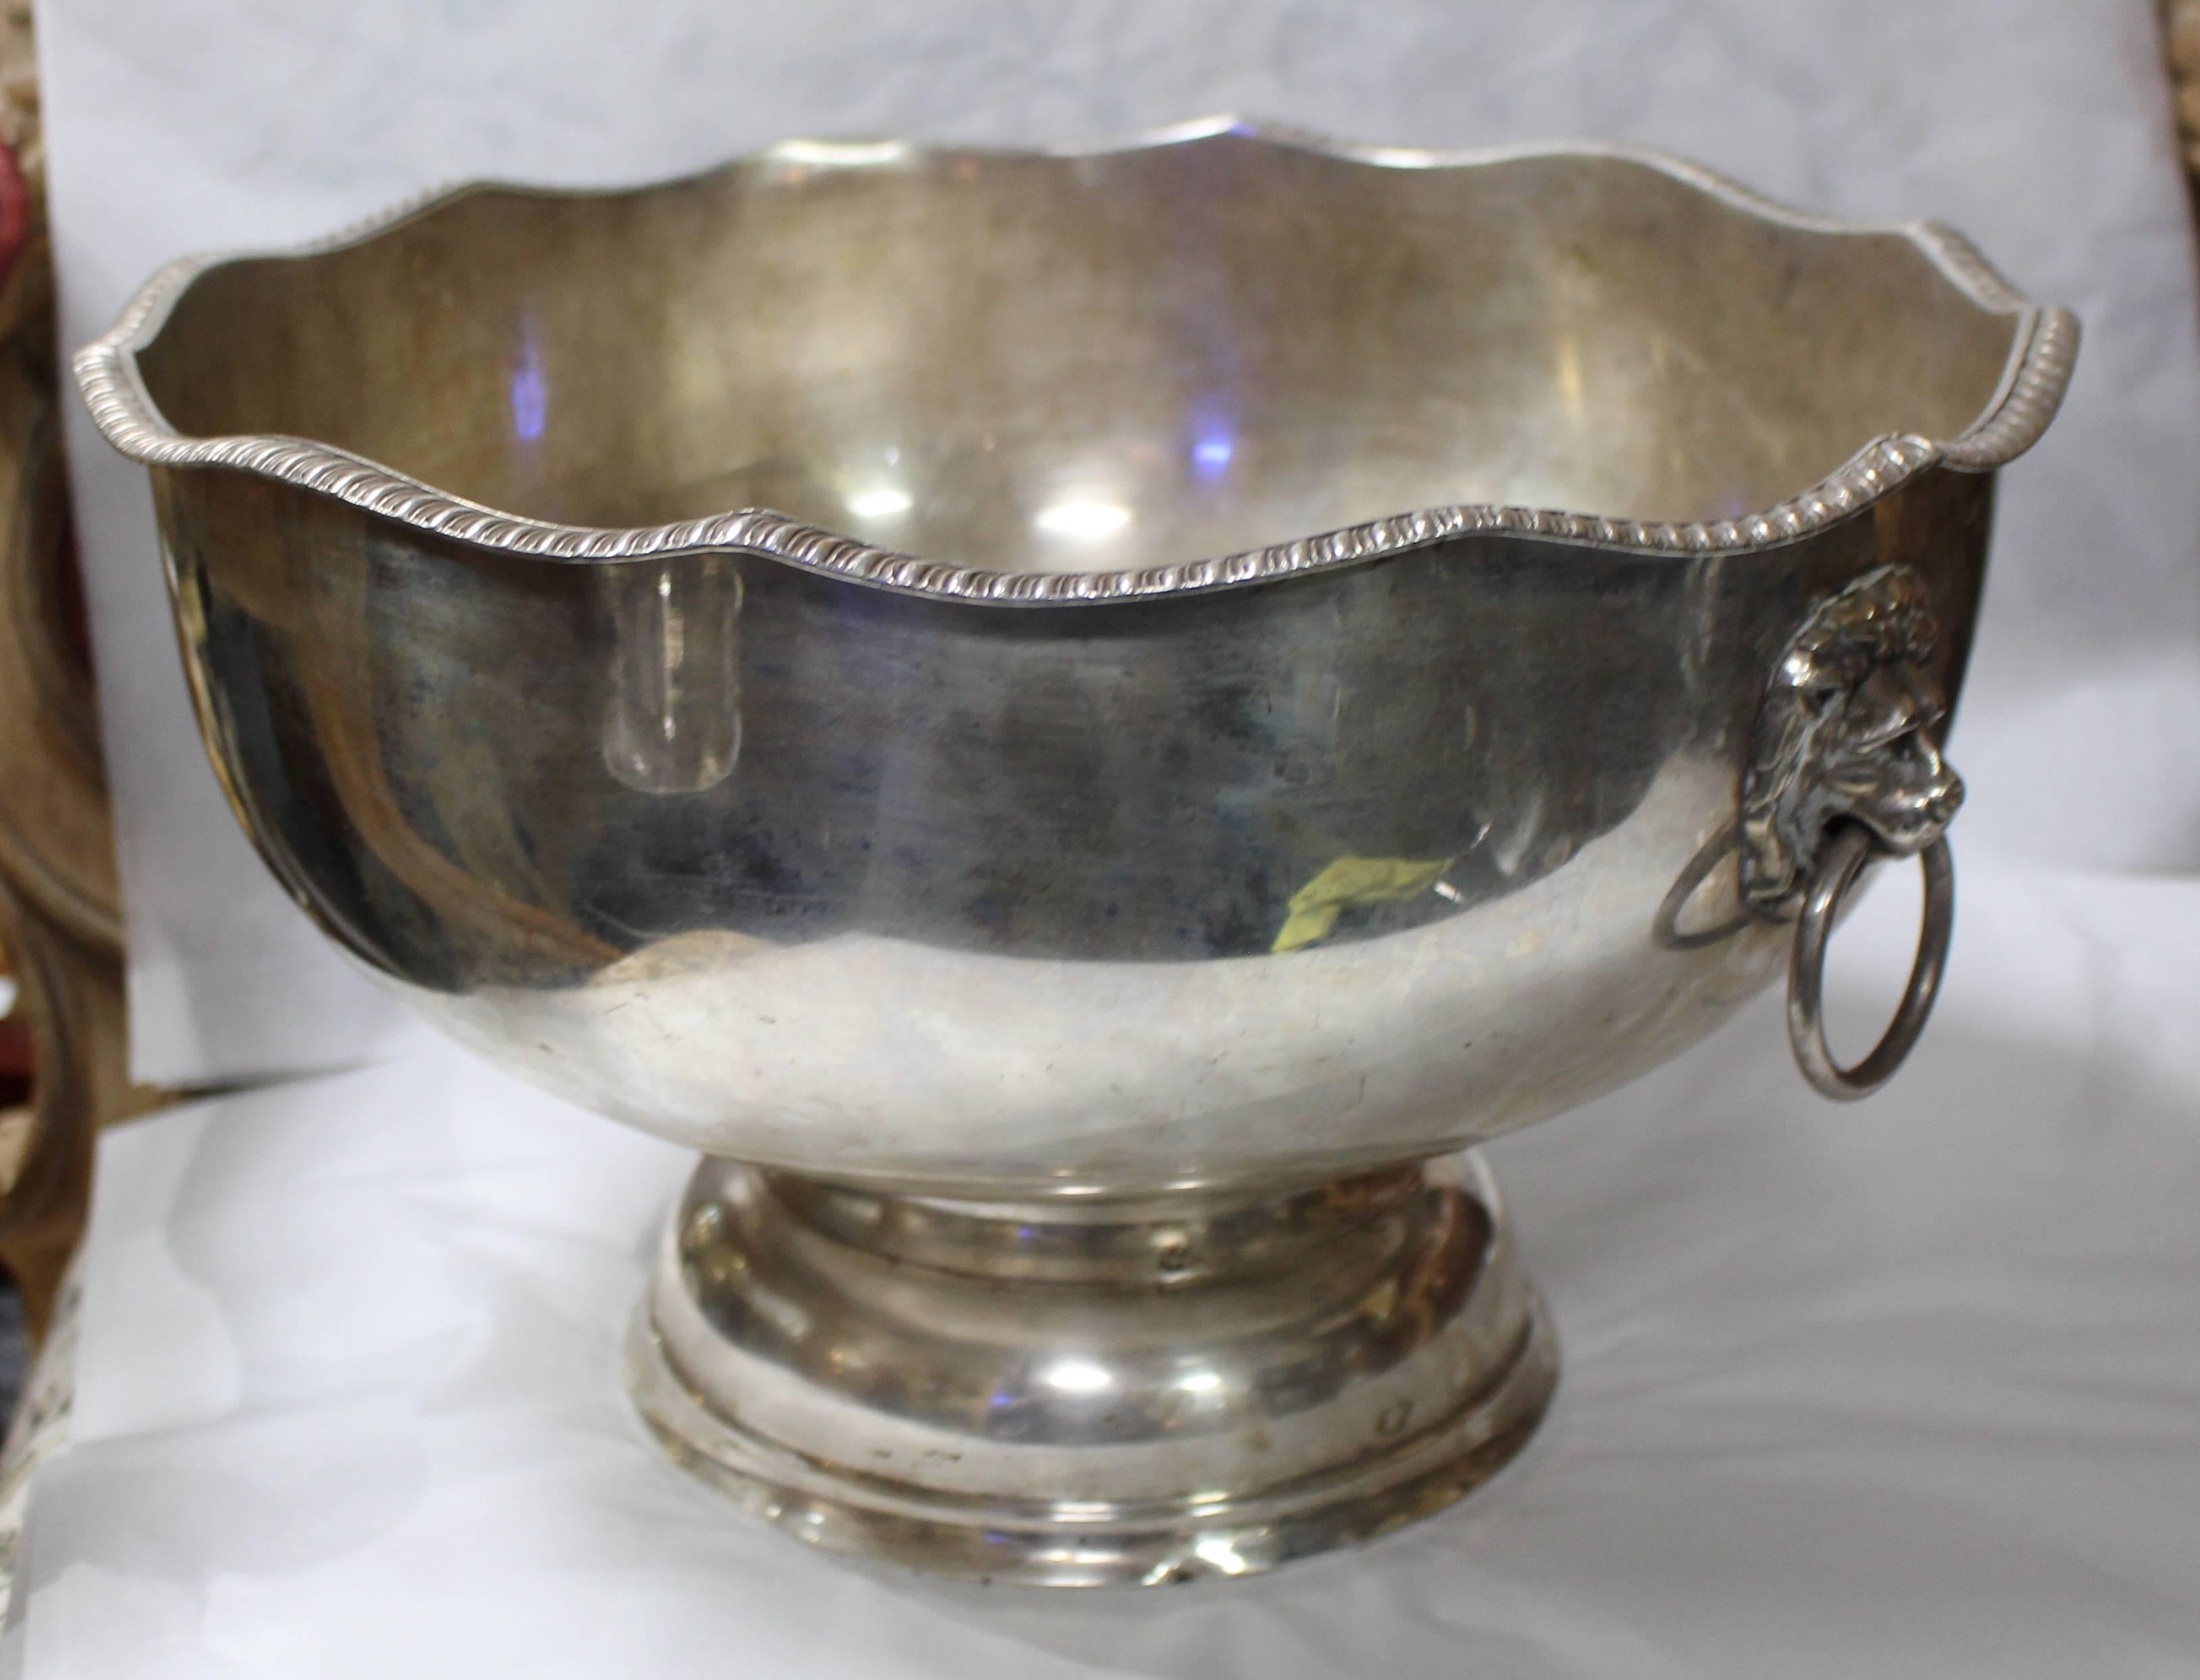 Bowl
Composition silver on copper
Measures: Width 35 cm / 13 3/4 in
Depth 33 cm / 13 in
Height 20 cm / 8 in
Condition good condition commensurate with age. Wear to the silver plate (where the copper underneath can be seen), as pictured
Good